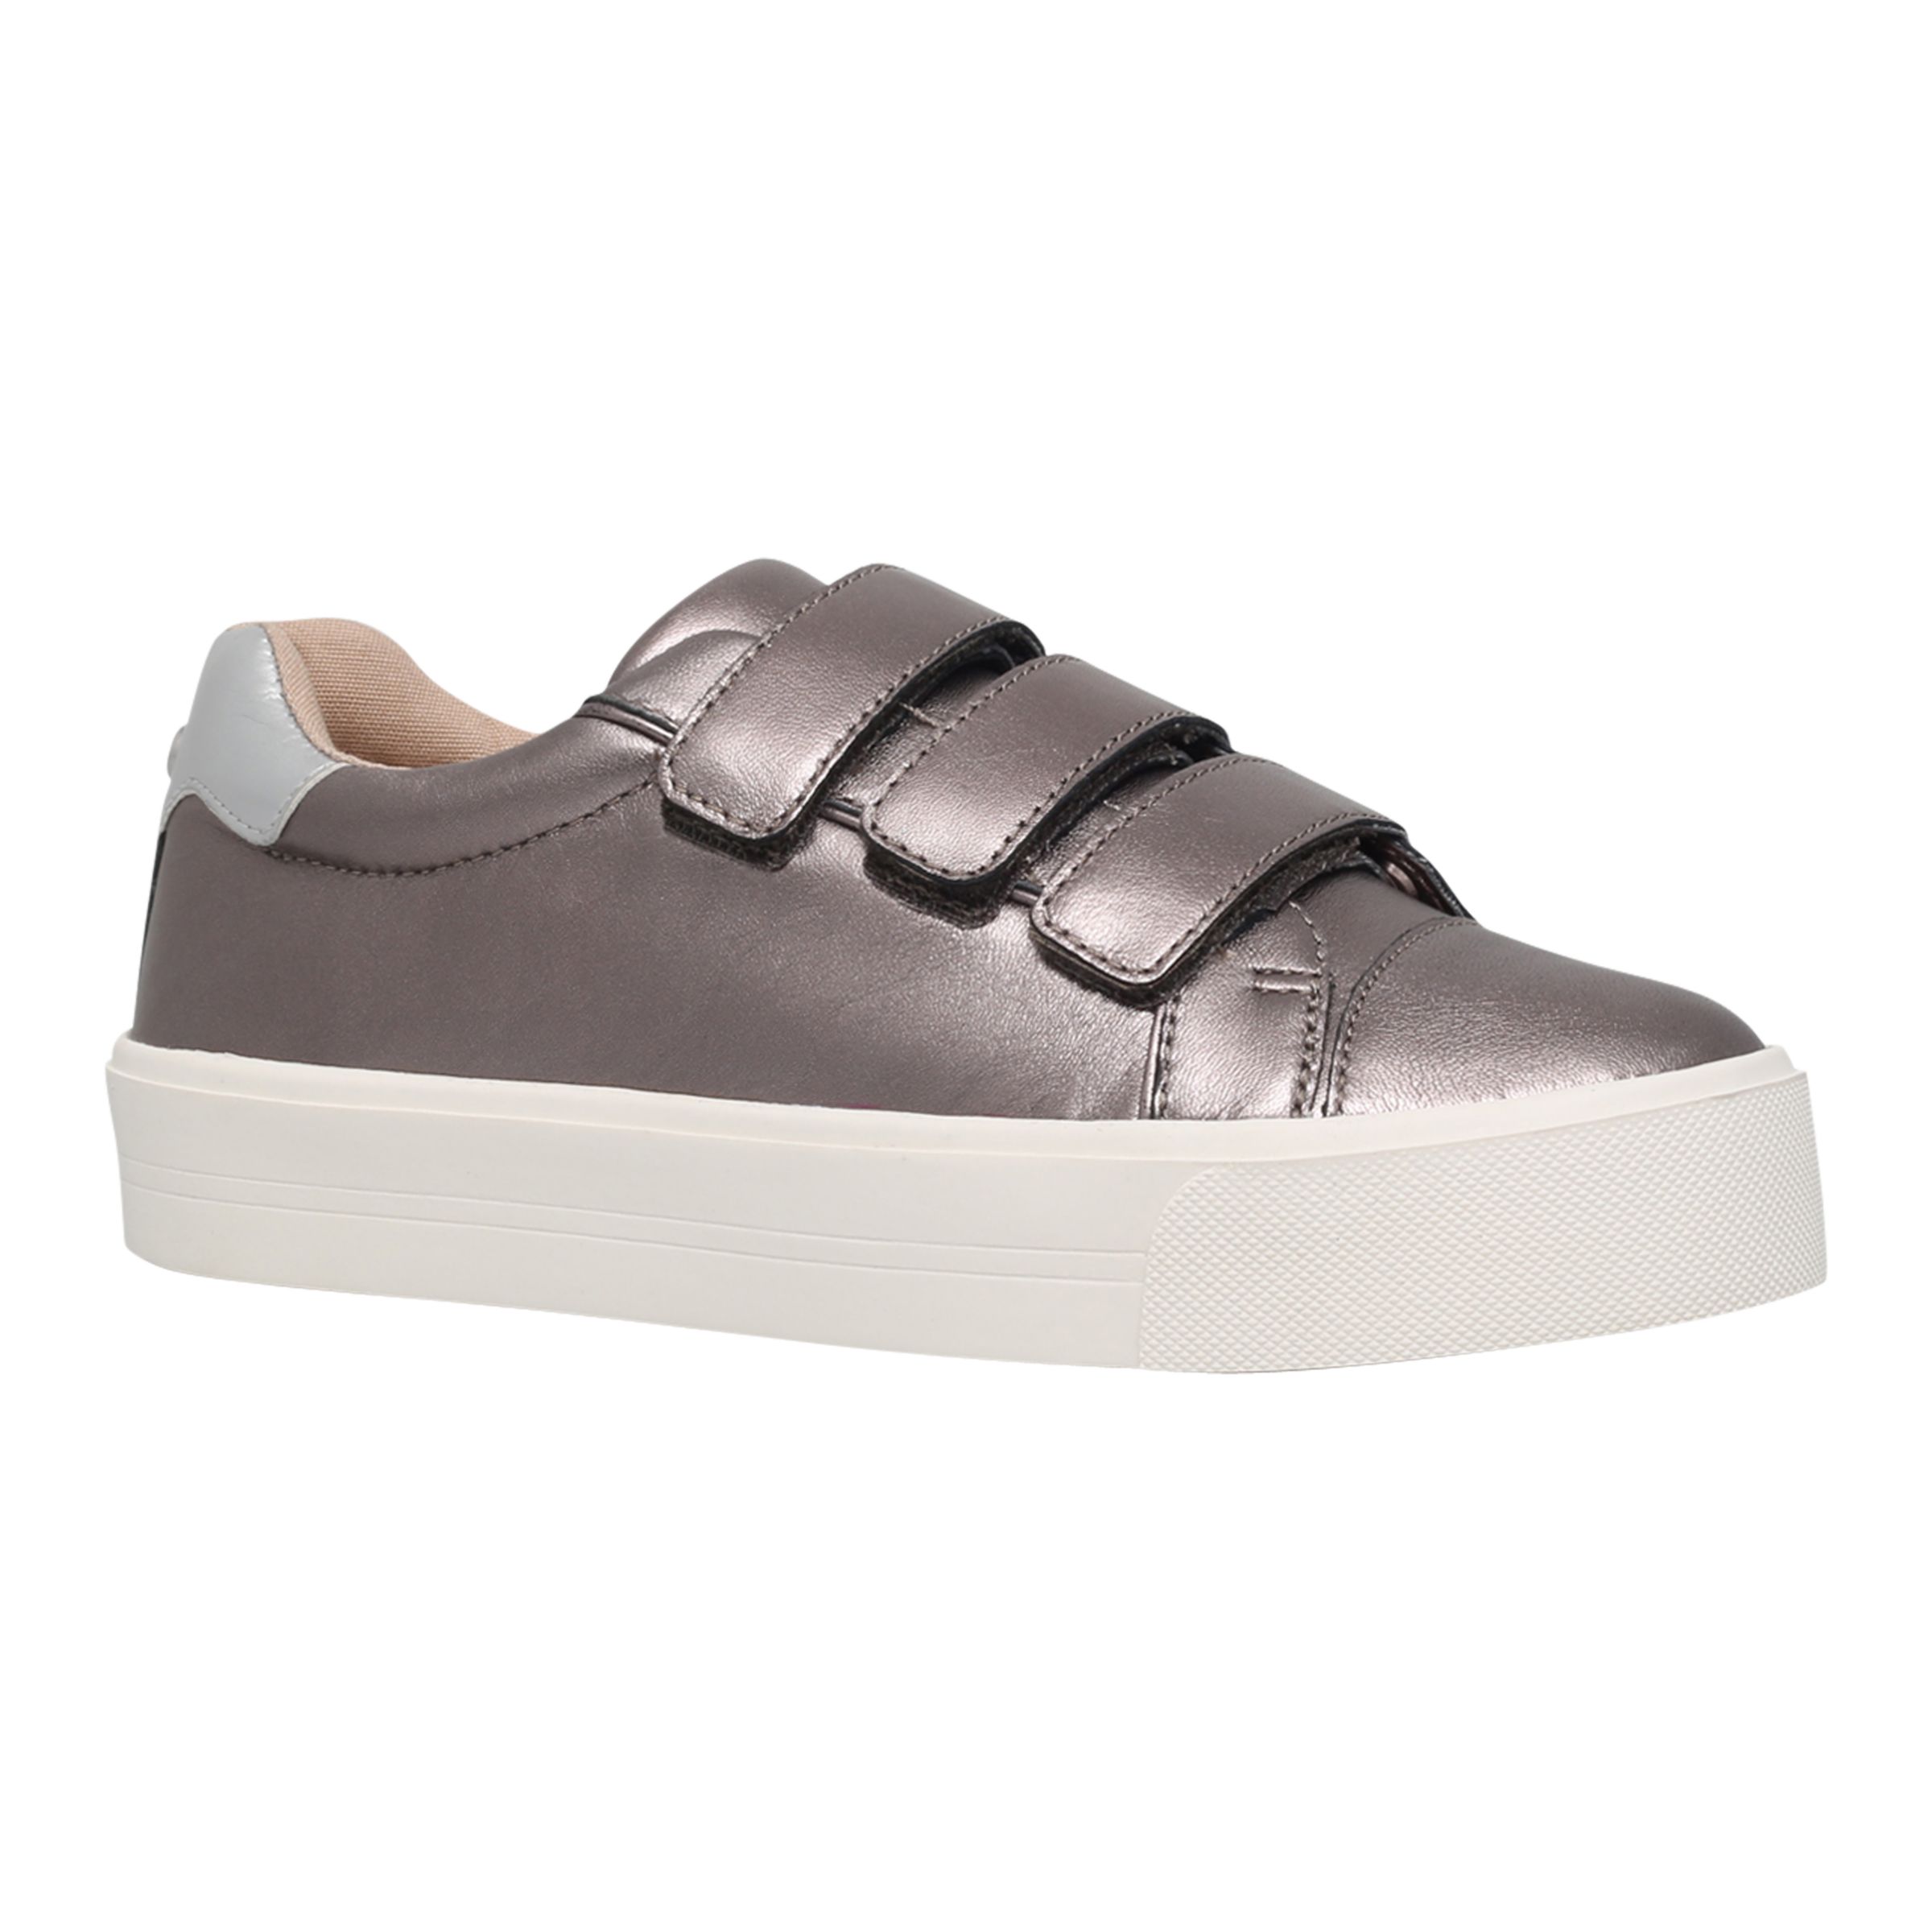 Carvela Lily Leather Sports Shoes, Pewter, 5